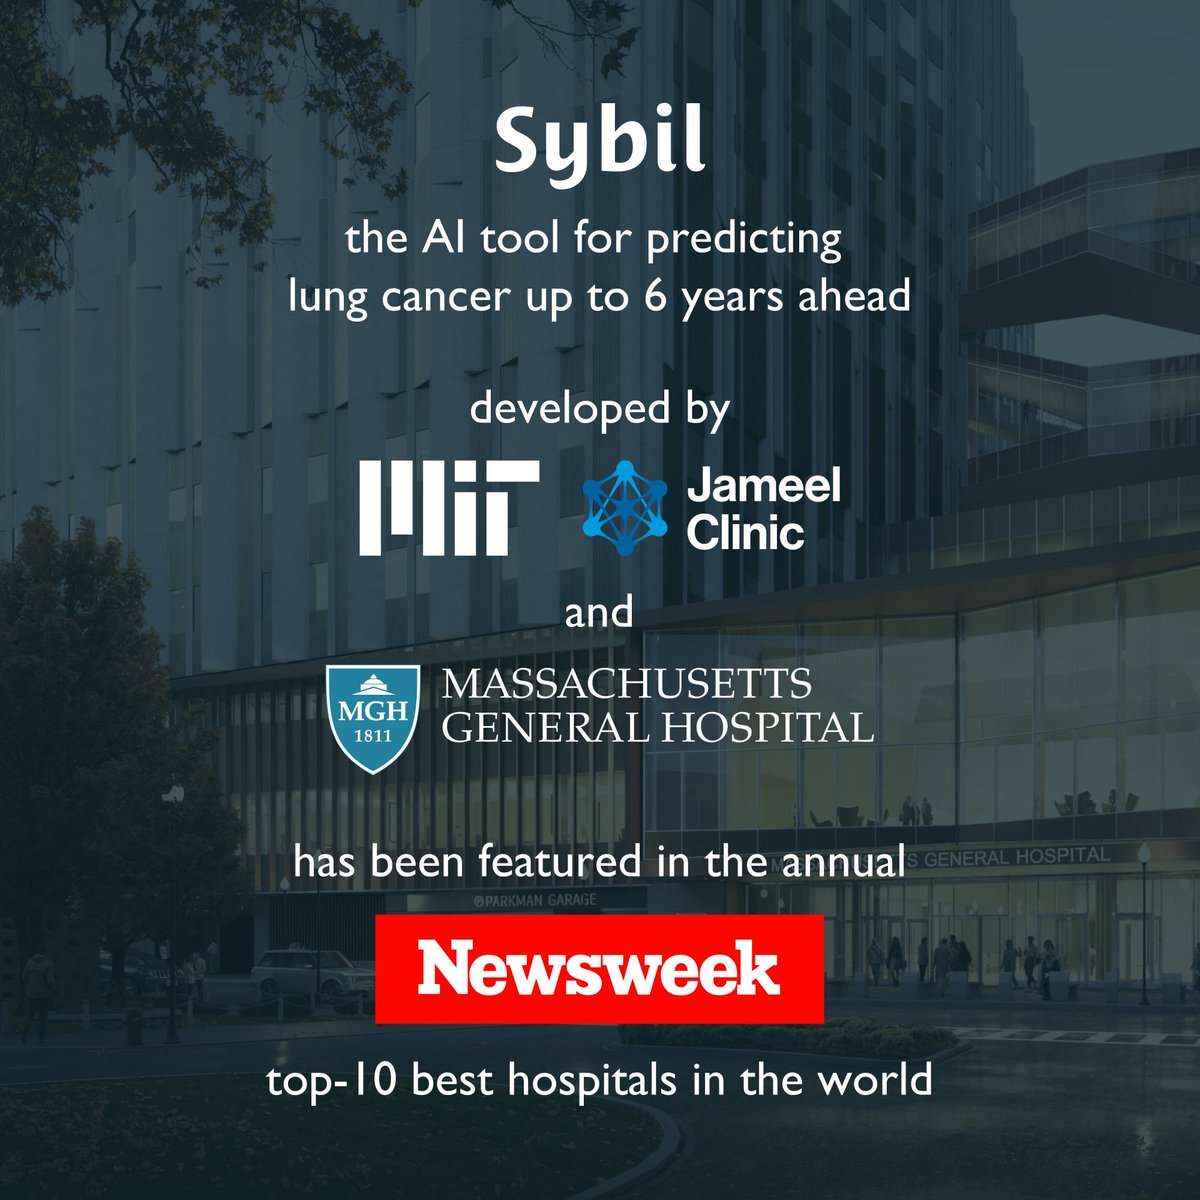 The 2024 Newsweek top-10 best hospitals in the world features Sybil, an AI tool for predicting cancer 6 years ahead that was developed by the MIT Jameel Clinic (@AIHealthMIT) and Mass General Hospital (which placed 5th in the ranking)